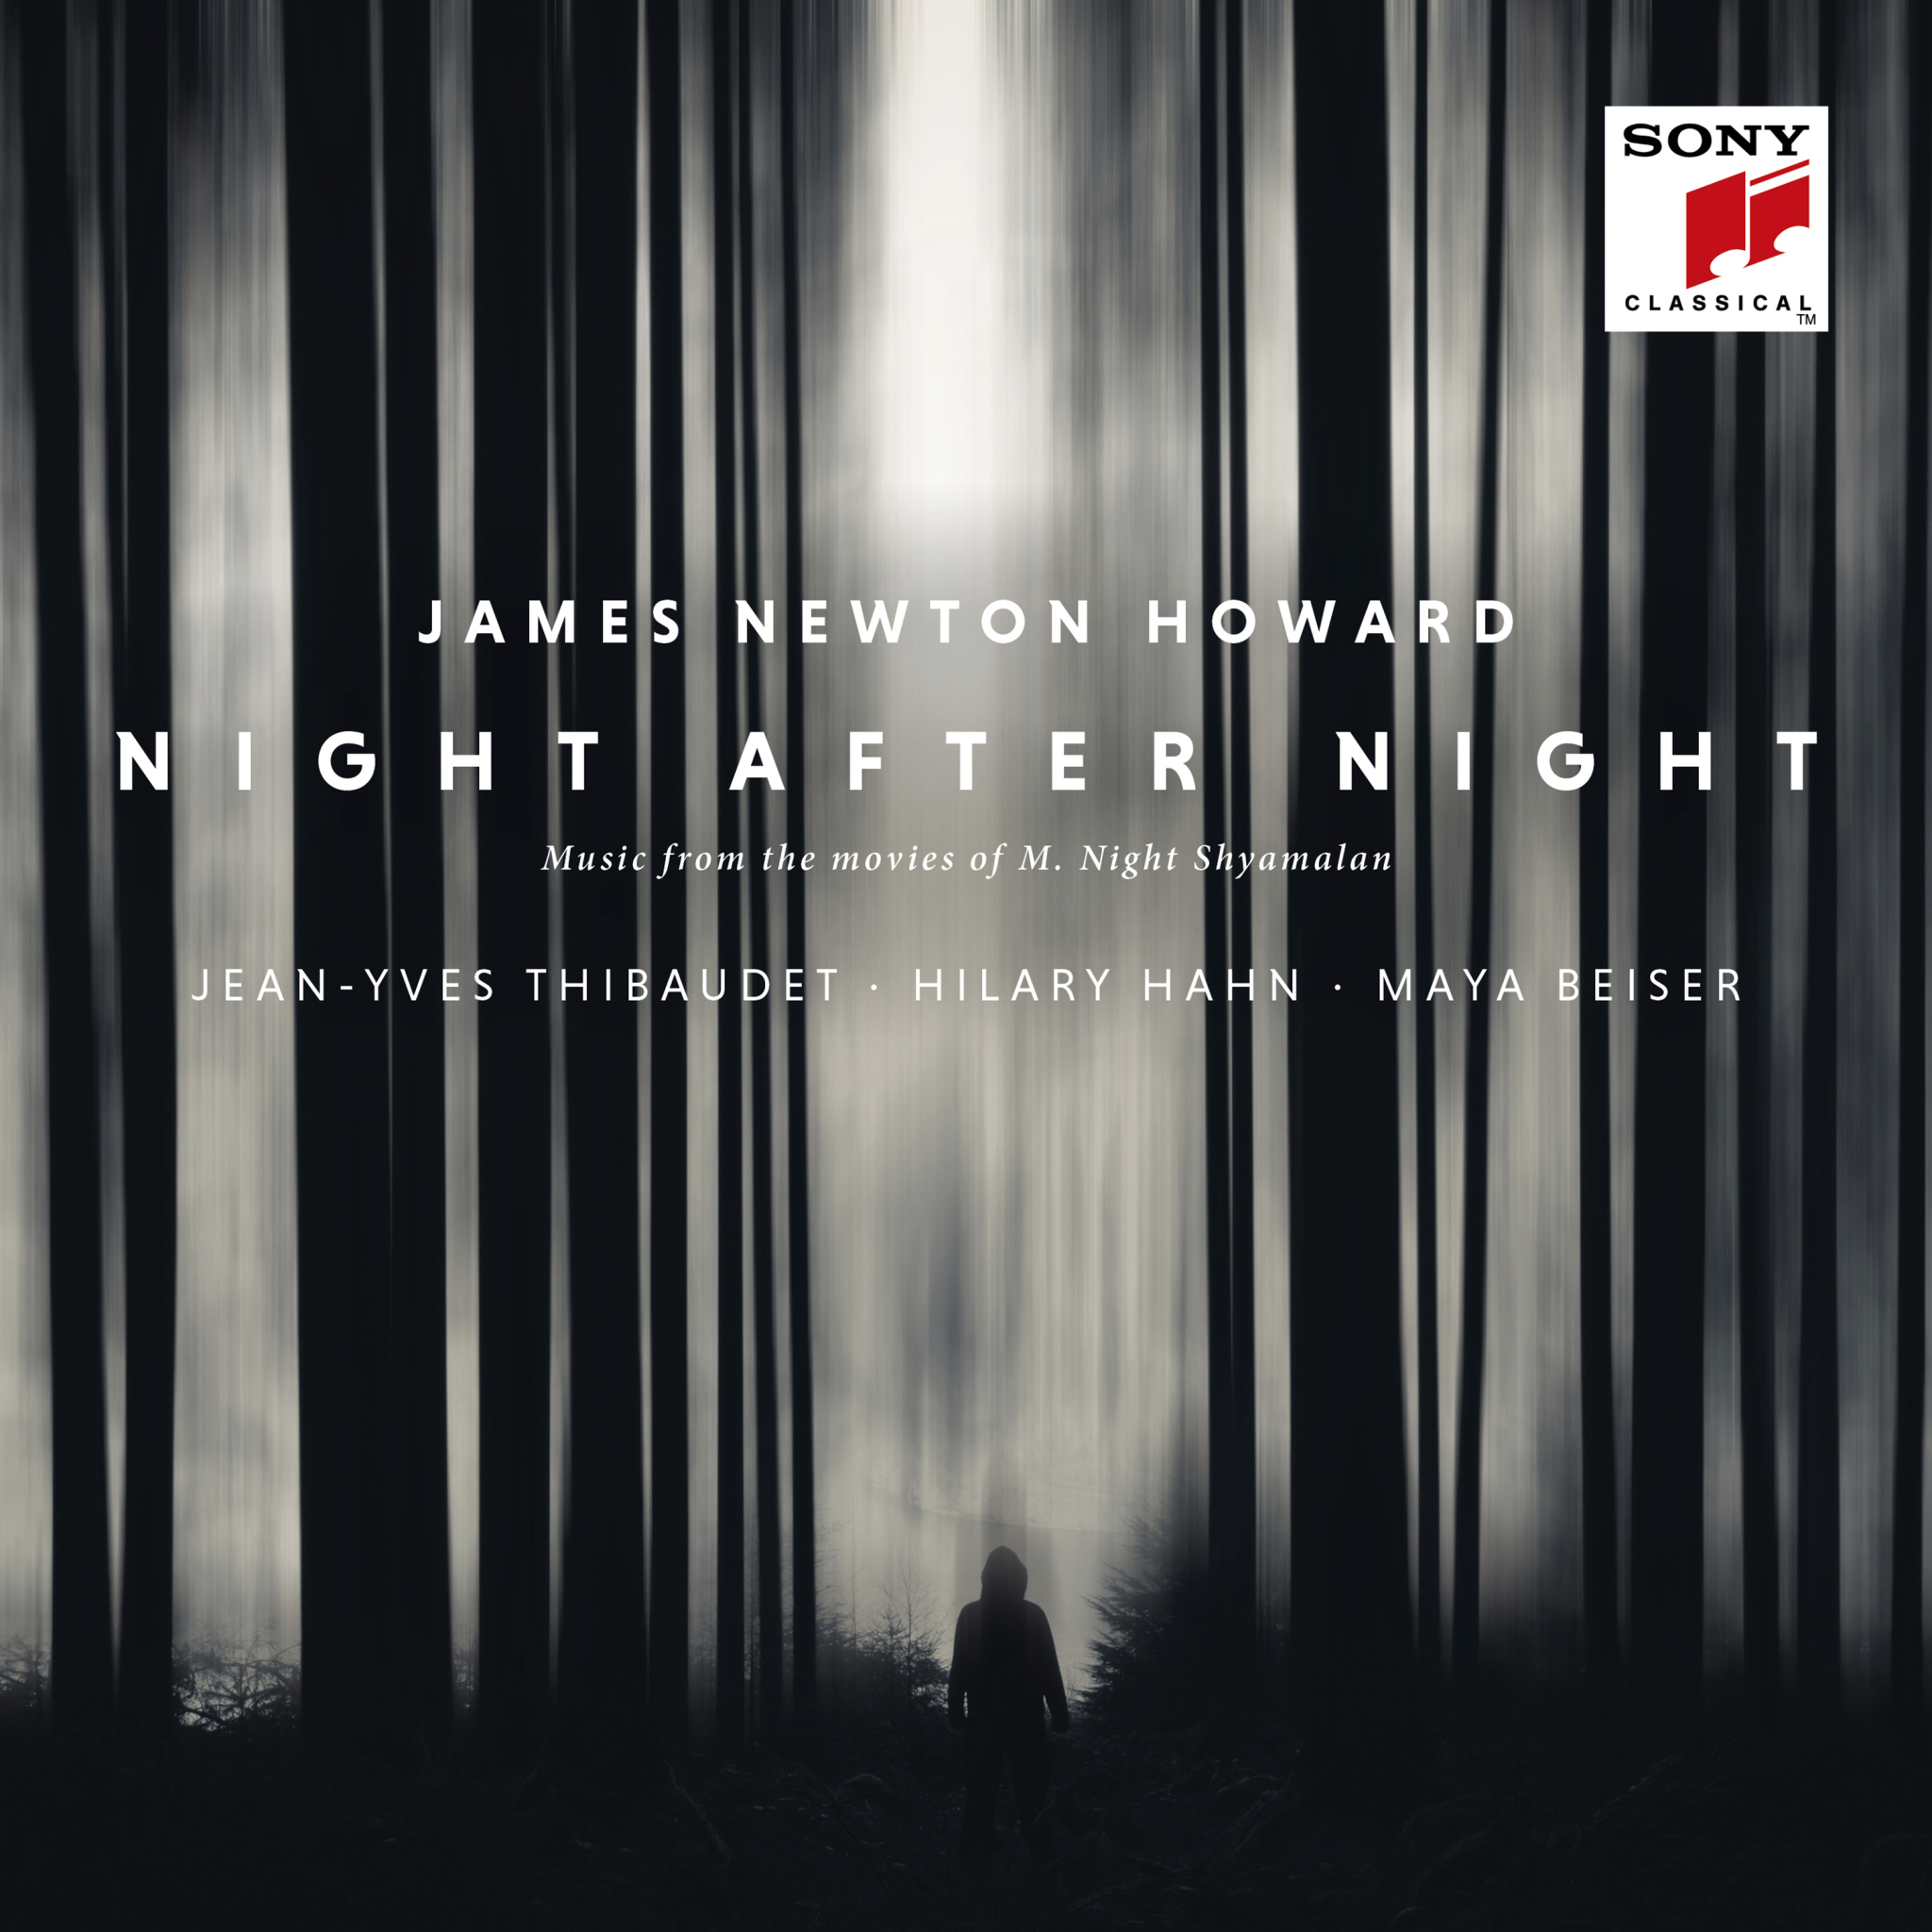 SONY EDITA EN OCTUBRE 'JAMES NEWTON HOWARD  REIMAGINES MUSIC FROM THE MOVIES OF M. NIGHT SHYAMALAN ON  NIGHT AFTER NIGHT'